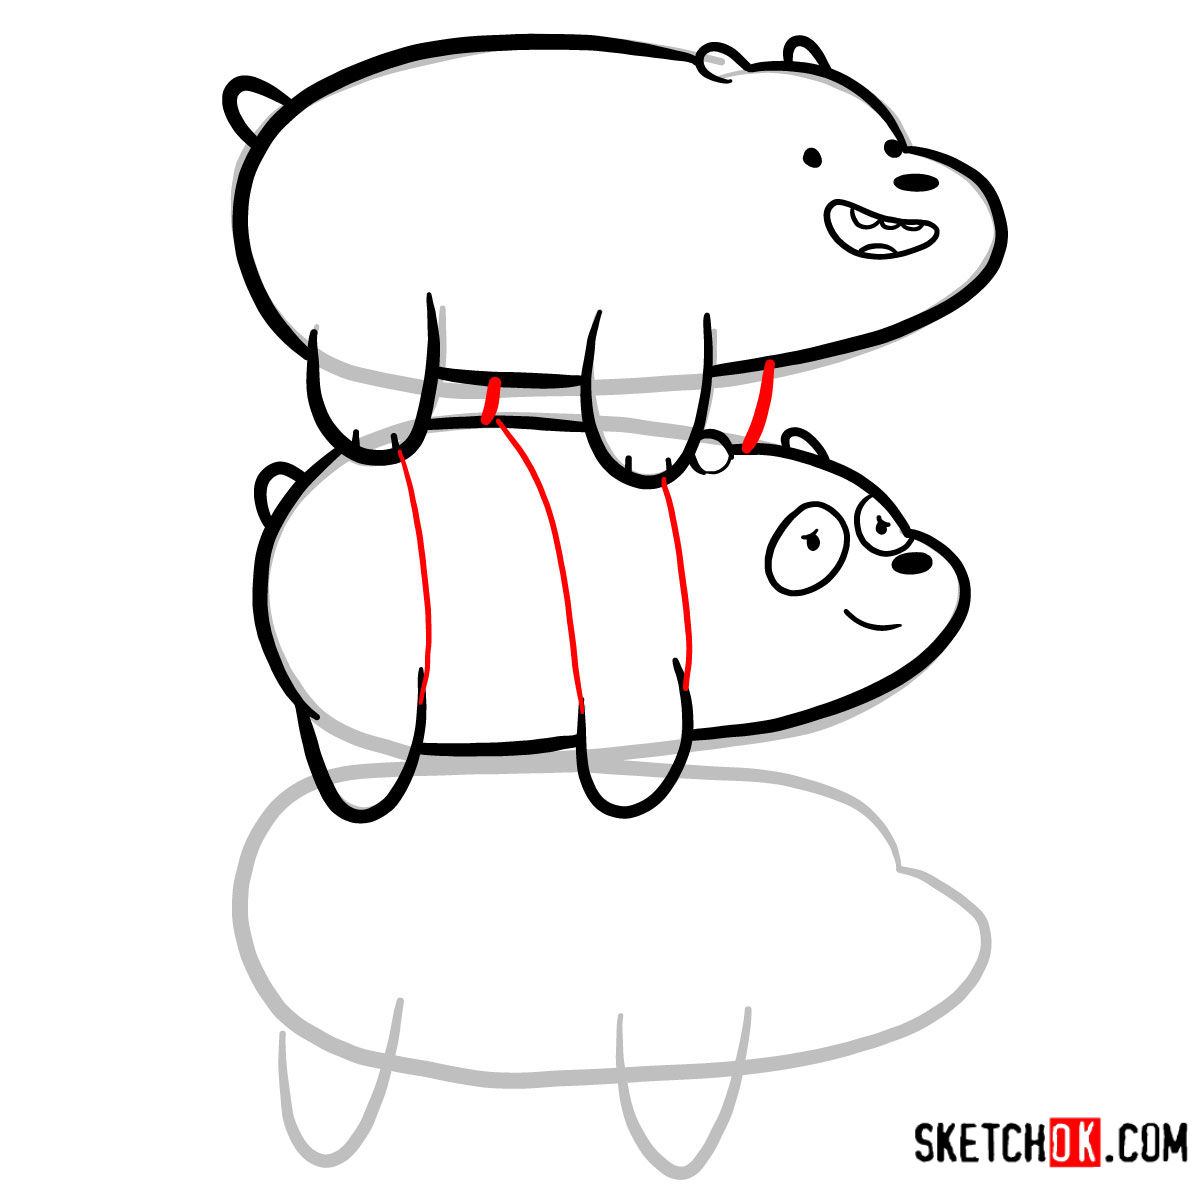 How to draw the bears standing on each others back | We Bare Bears - step 10